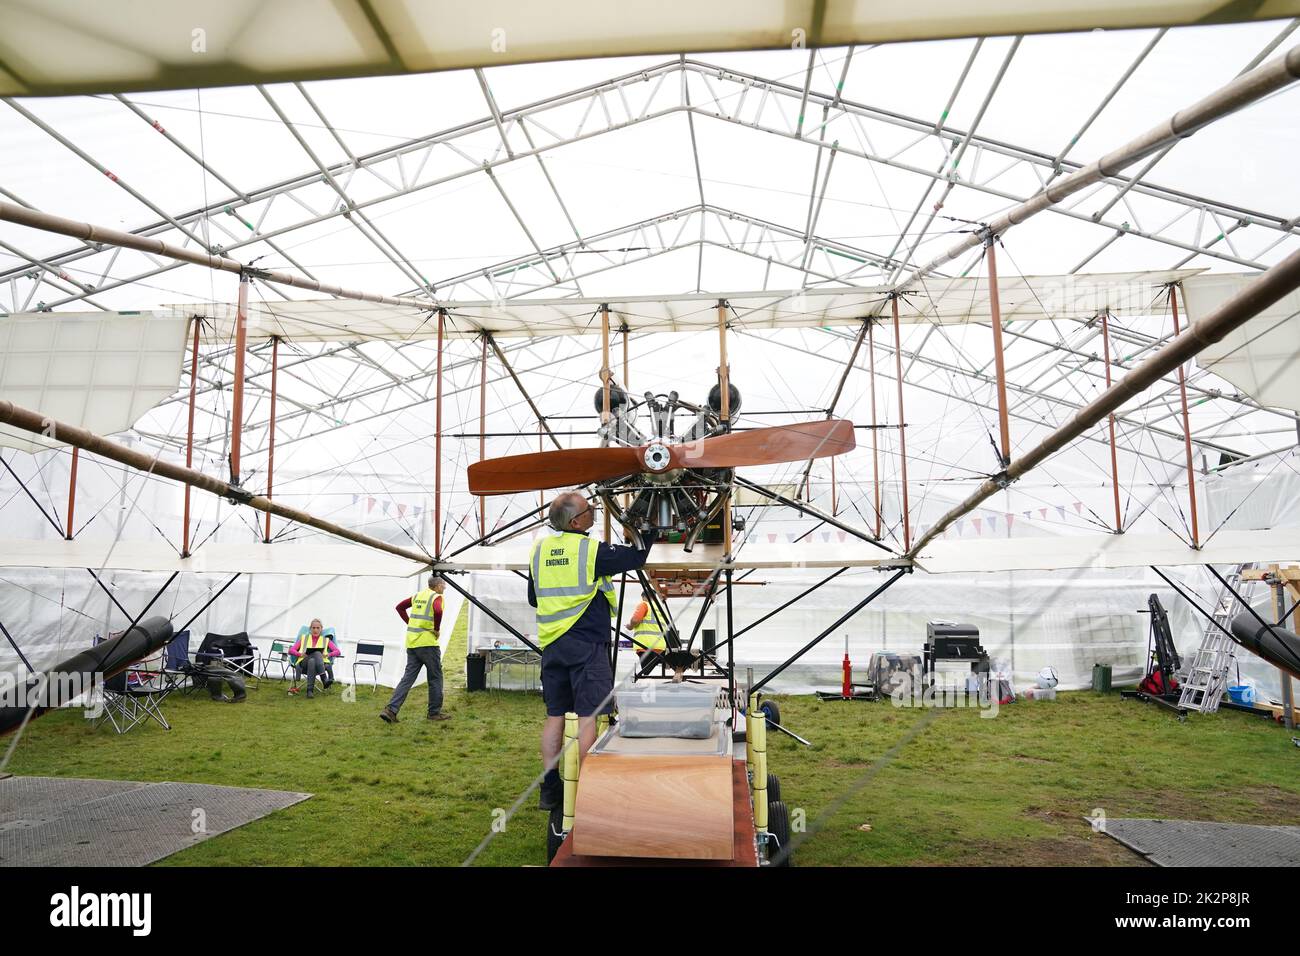 A replica of Waterbird, the UK's first successful seaplane and the only one its kind in the world, is prepared before its first public flight on Lake Windermere in Cumbria. The event marks the climax of a 13-year project to create an exact copy of the Waterbird and apart from a modern engine, it faithfully recreates the detail of the original from 1911 seaplane. Picture date: Friday September 23, 2022. The replica has been constructed from wood, bamboo and wires, the same materials used to construct the original seaplane. The 35ft long aircraft, has a wingspan of 40ft and weighs just 1000lb. I Stock Photo